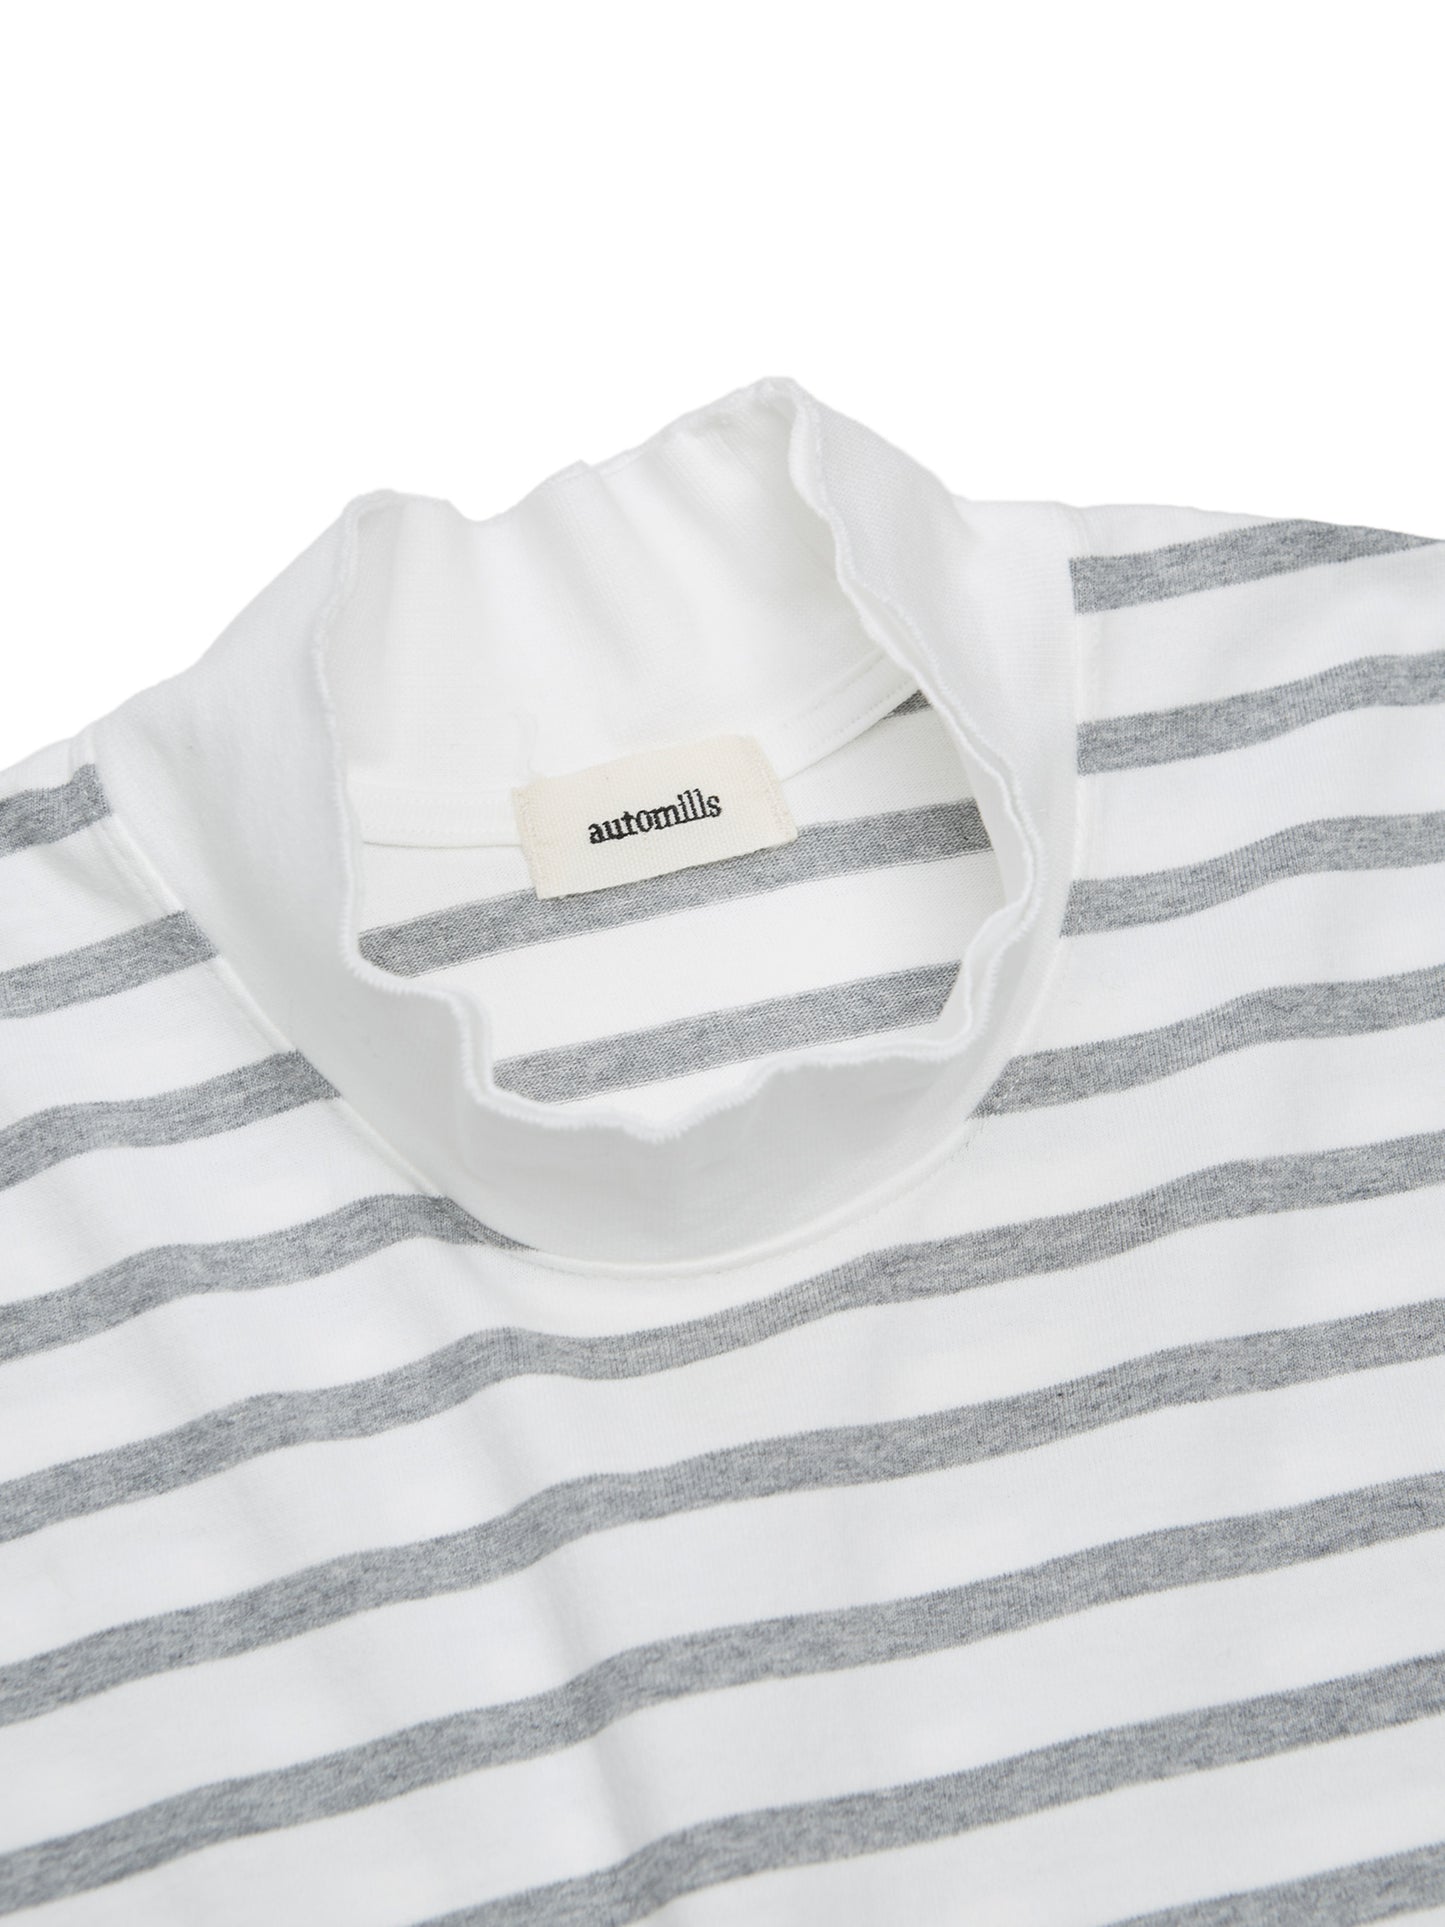 BAGGY N/S TEE COTTON BORDER JERSEY AM-C0204 White/Gray